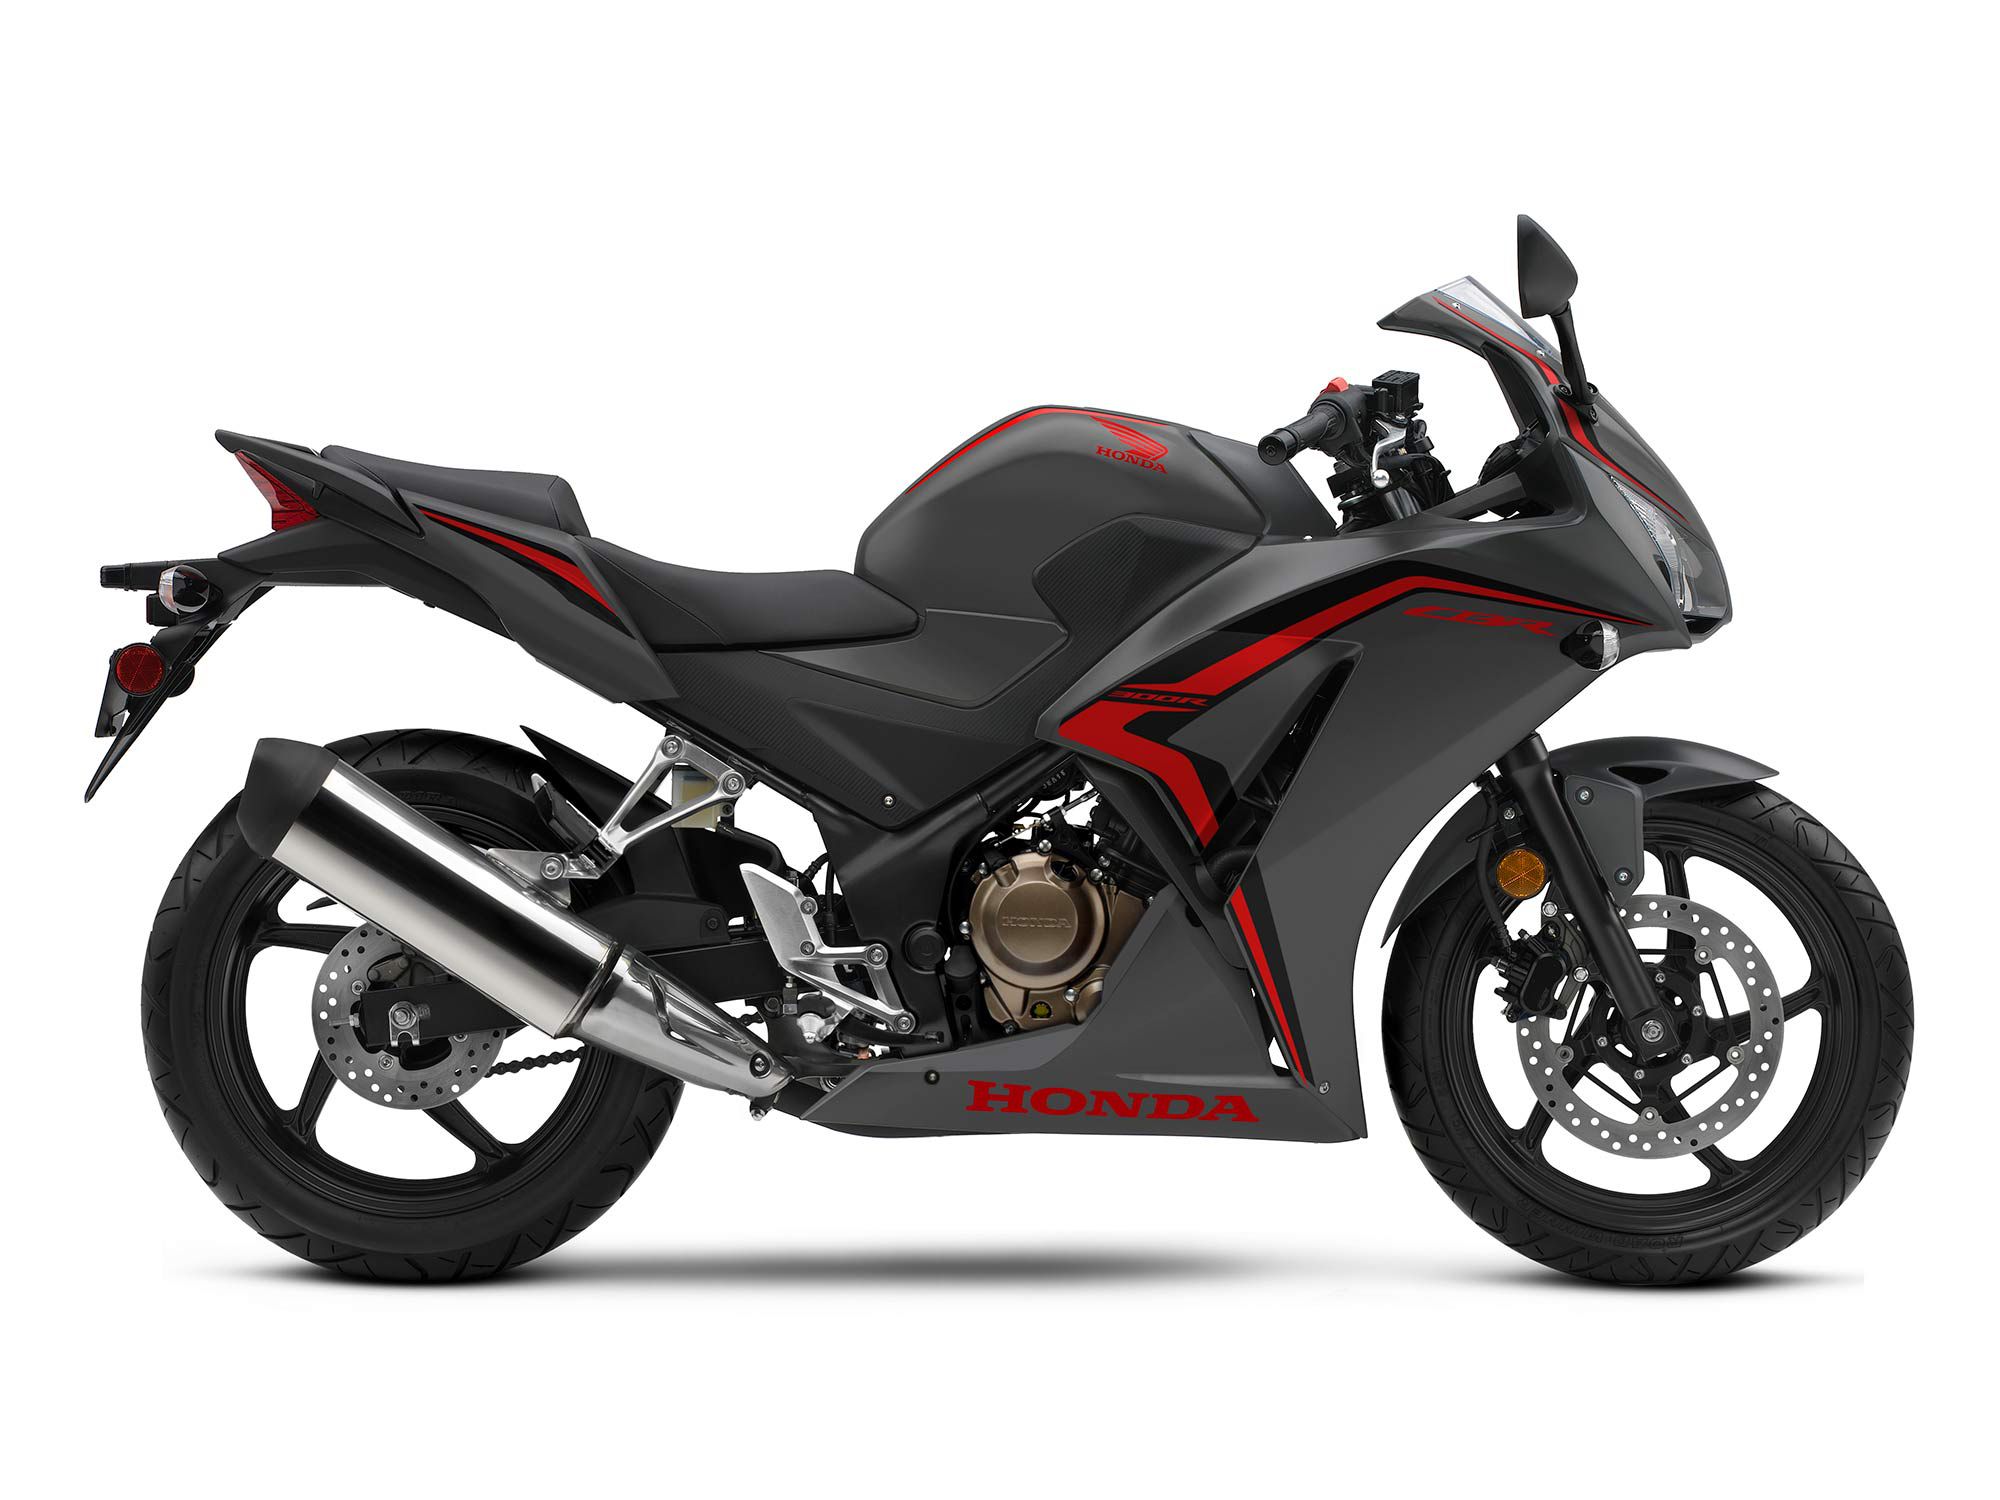 The CBR300R’s 286cc single-cylinder engine sips fuel from its 3.4-gallon tank.